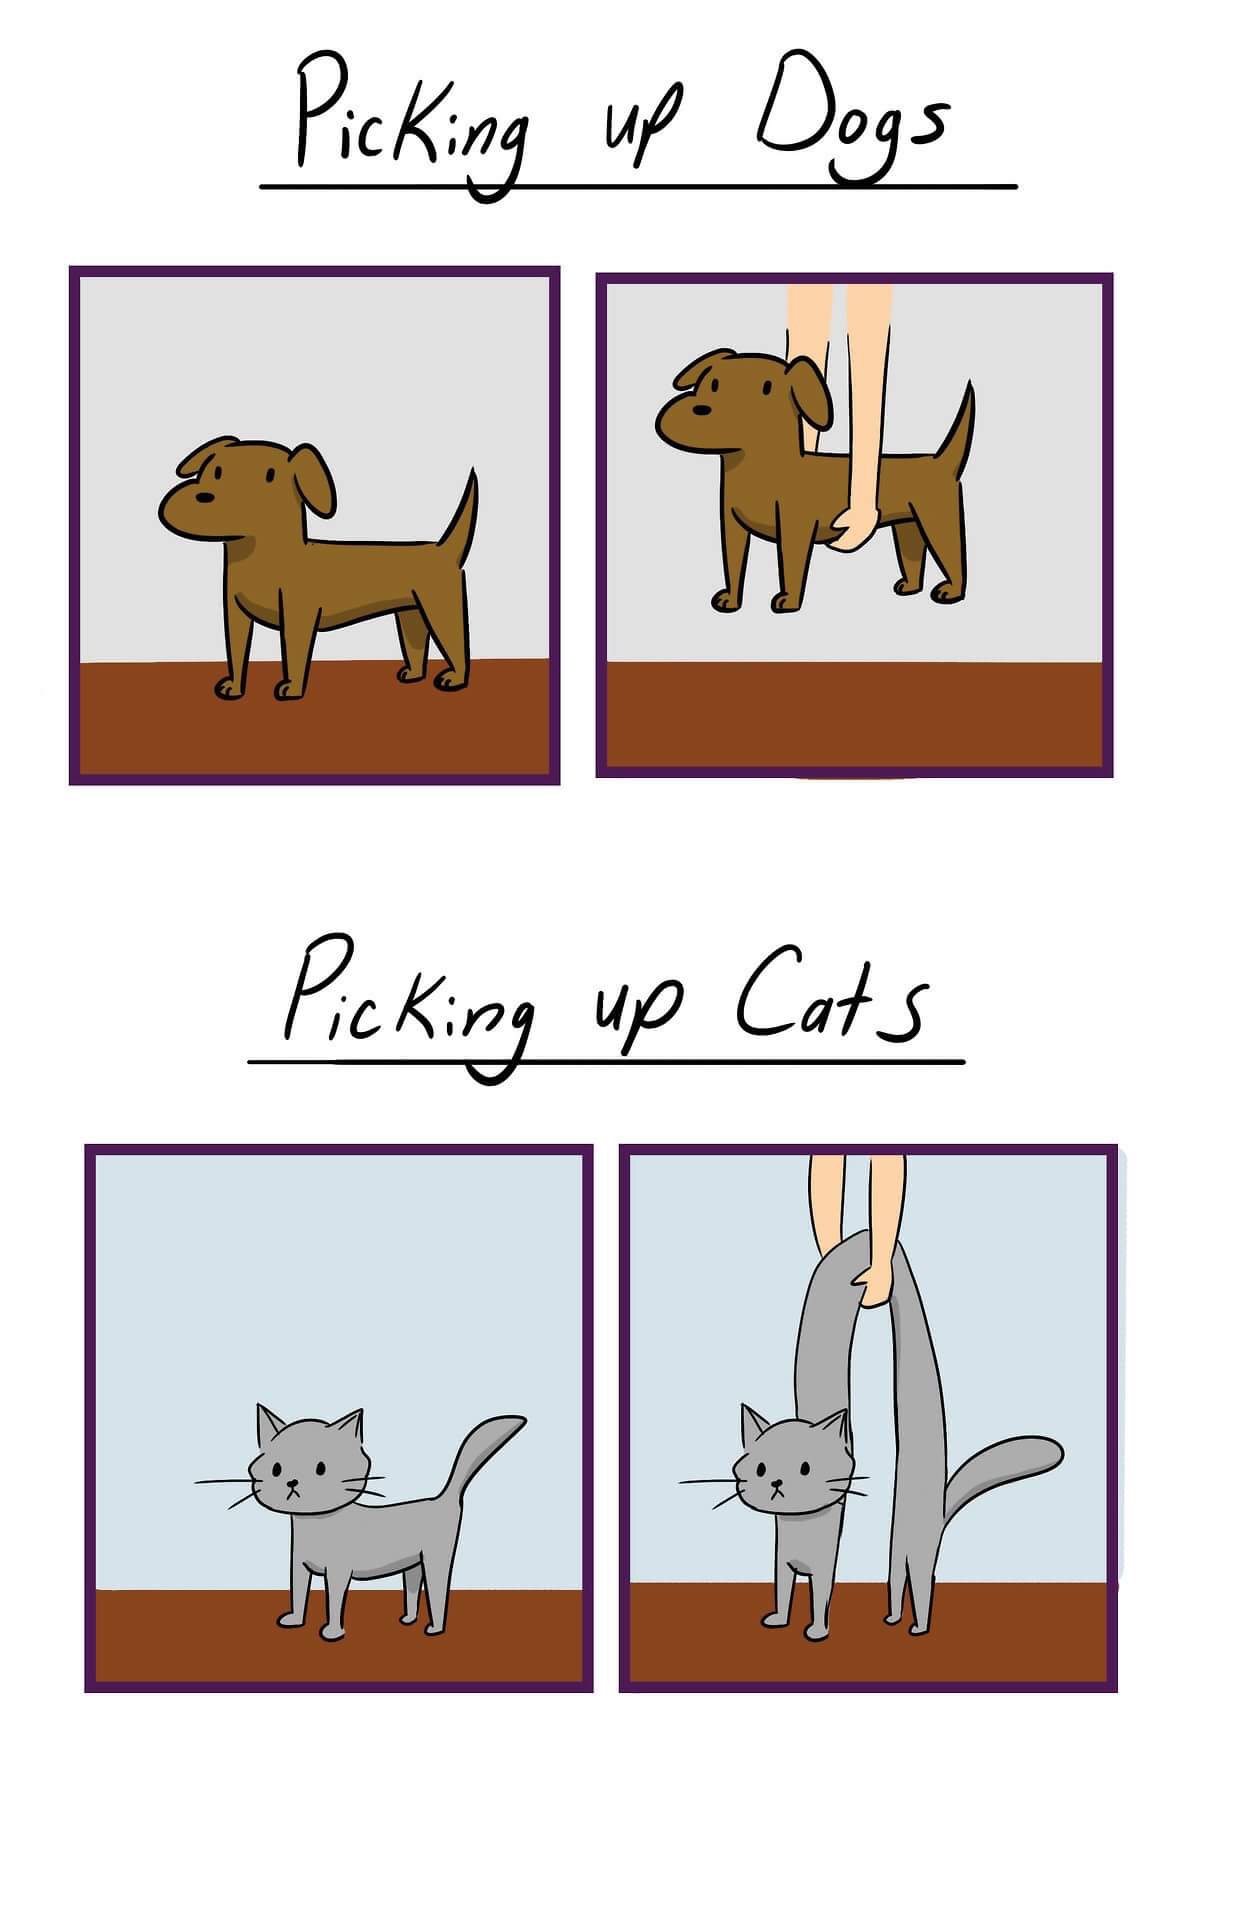 picking up dogs vs cats - 1. Picking up Dogs Picking up Cats